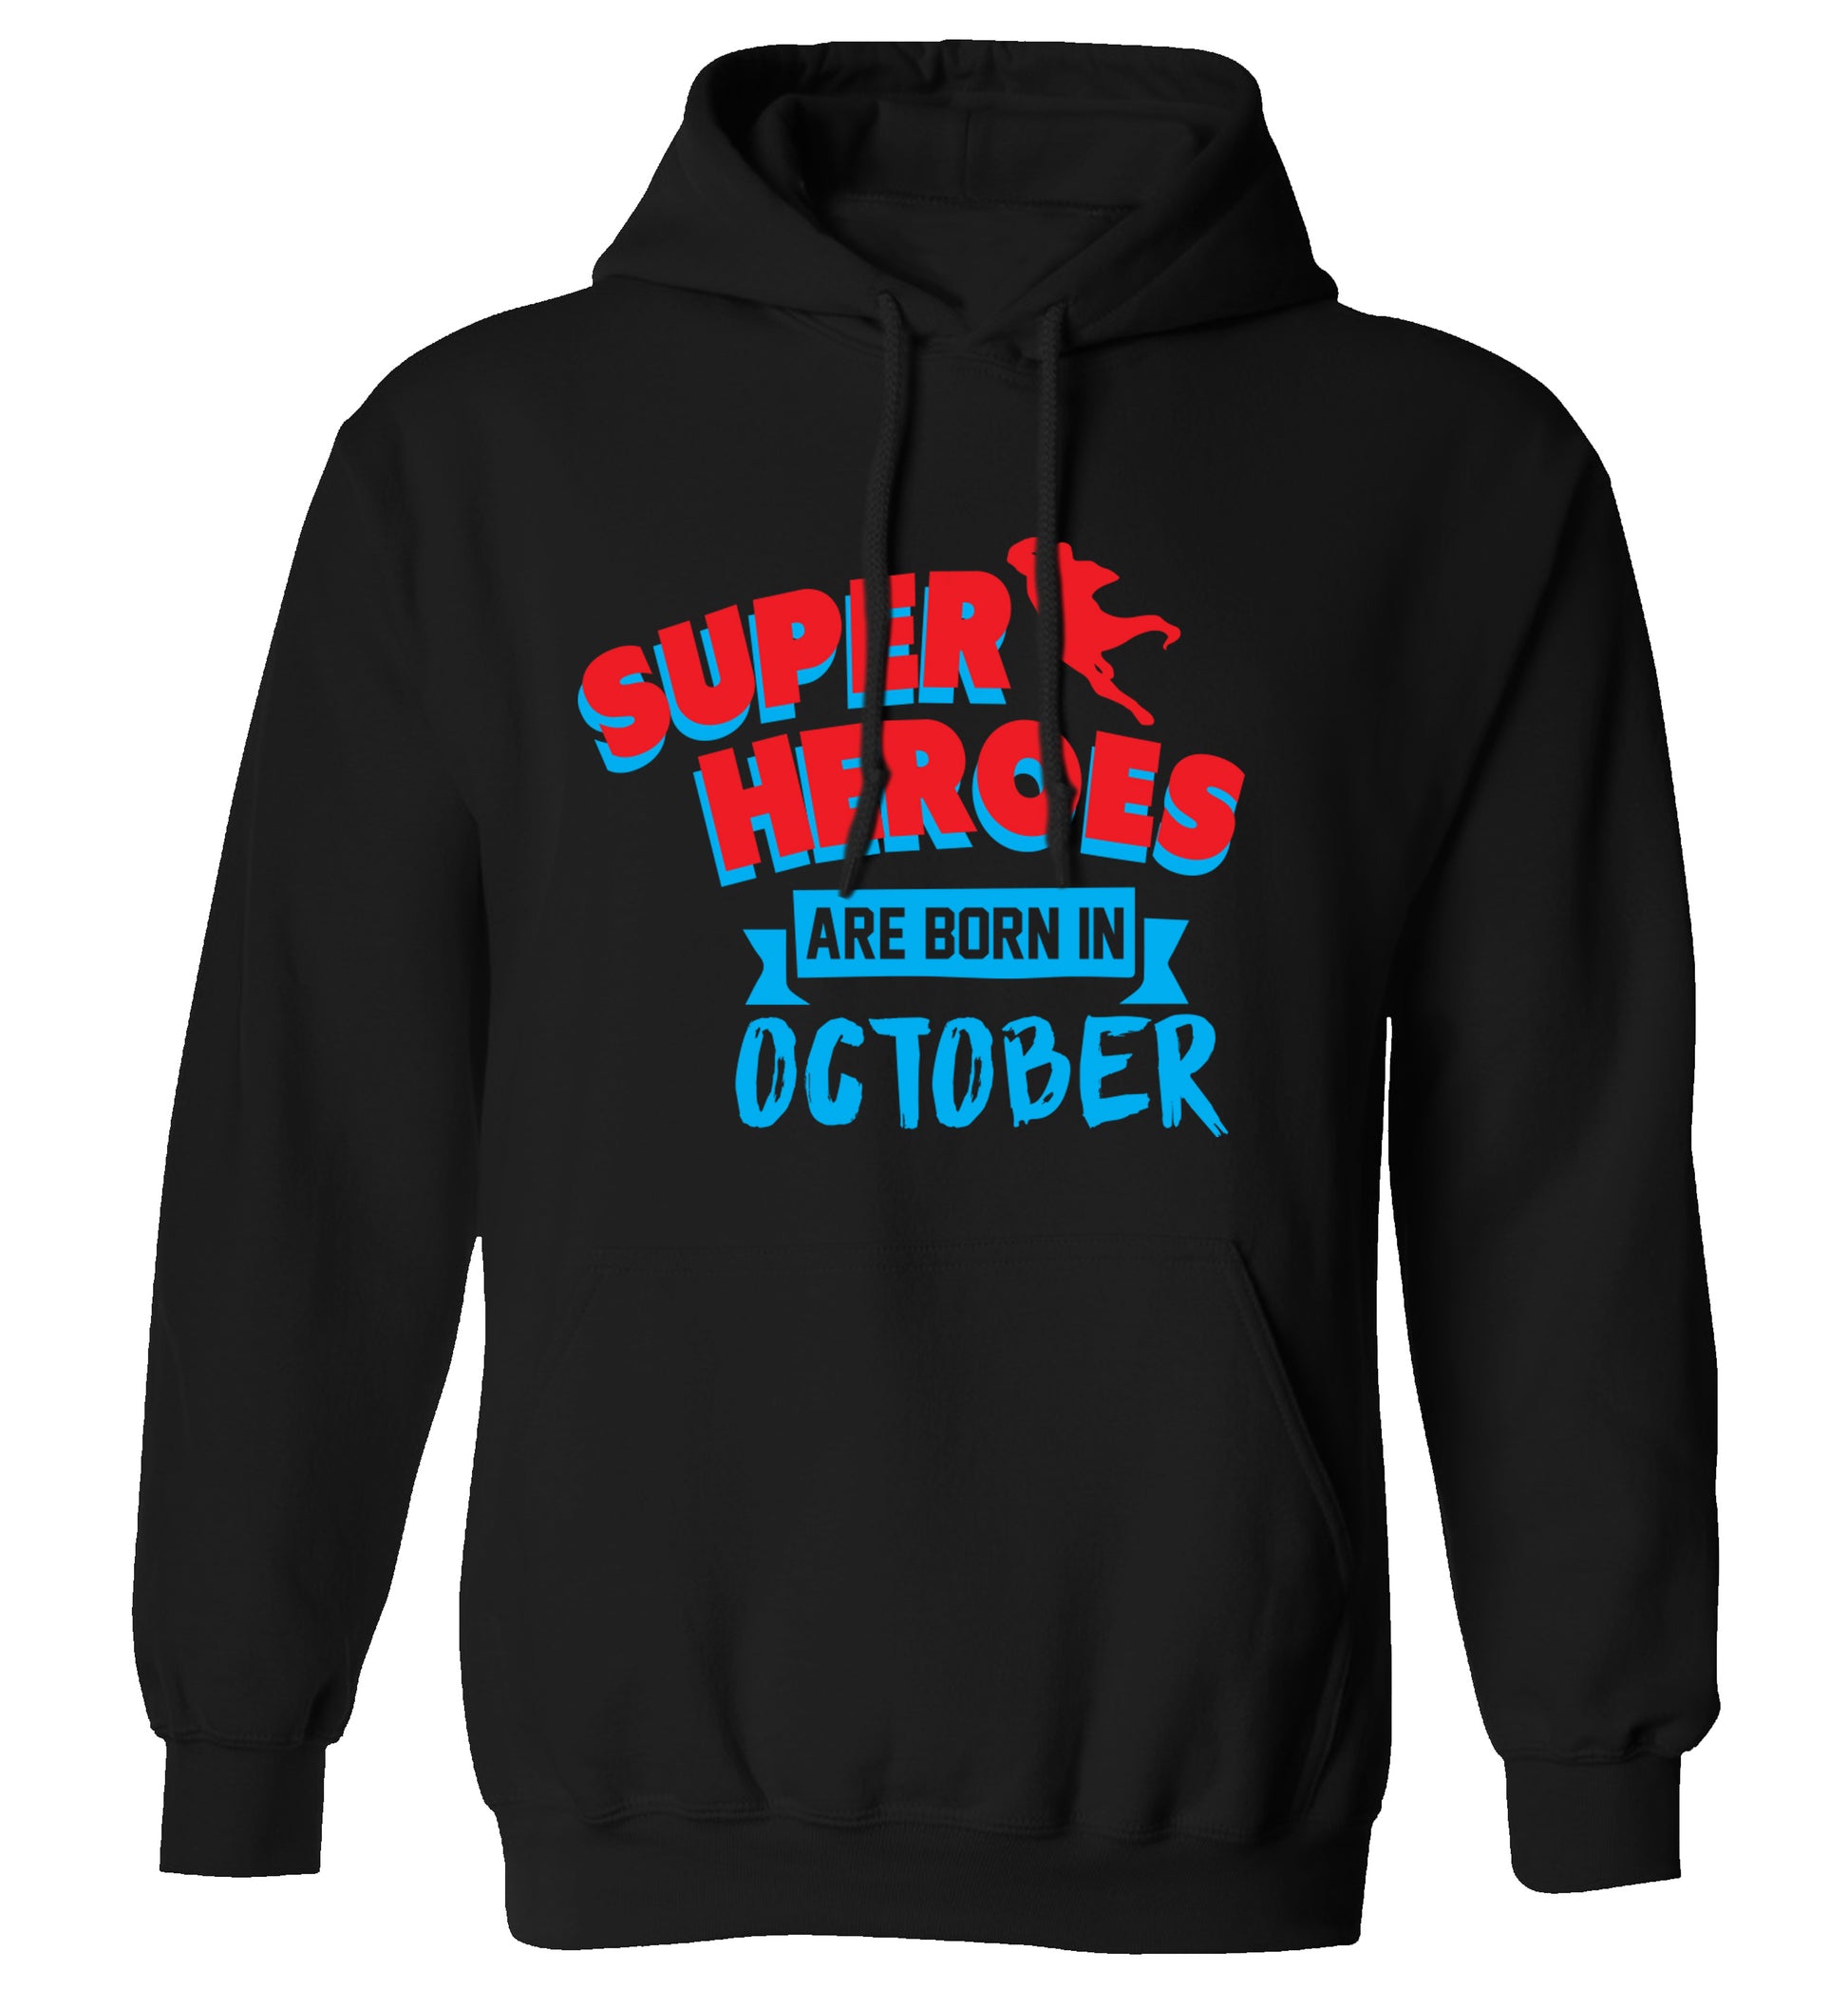 Superheroes are born in October adults unisex black hoodie 2XL